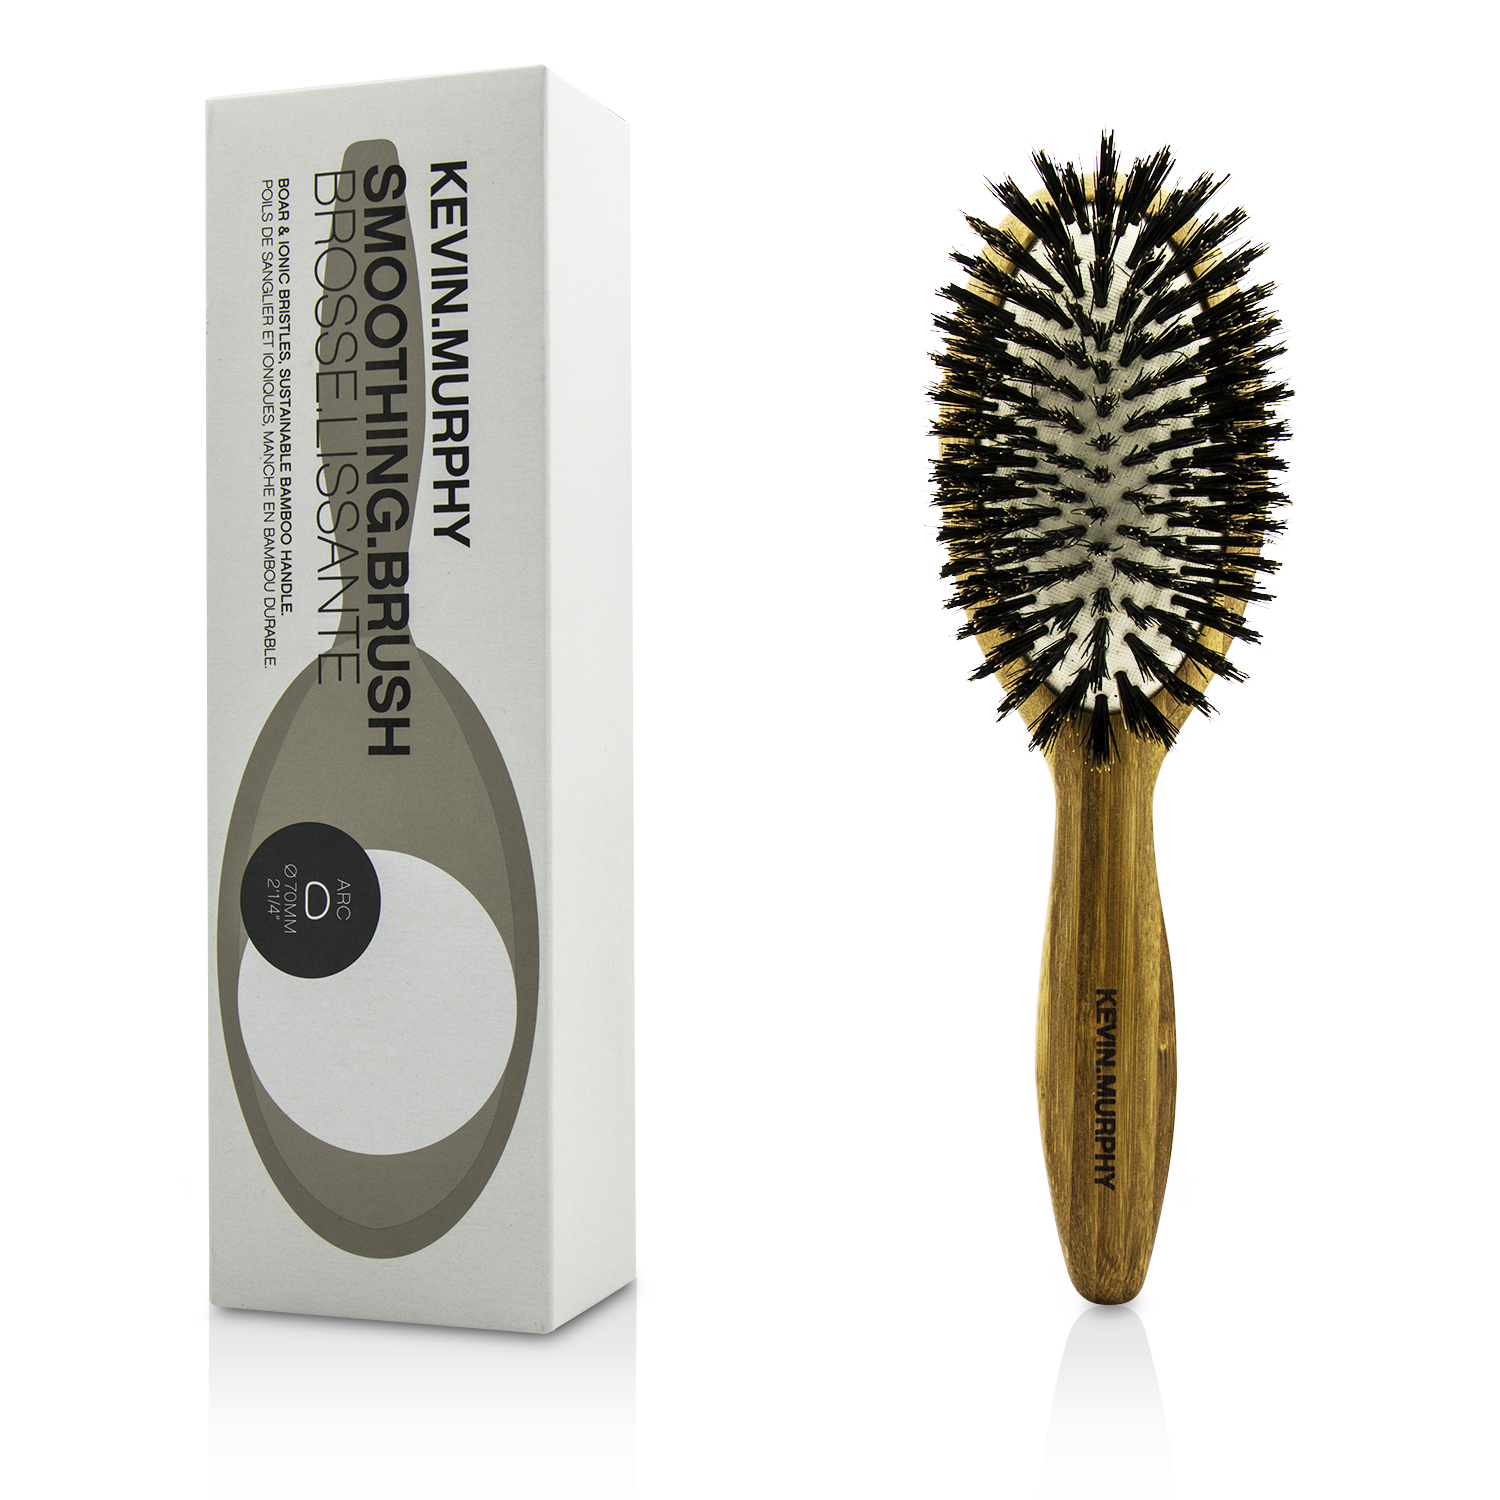 Smoothing.Brush - ARC 70mm (Boar  Ionic Bristles Sustainable Bamboo Handle) Kevin.Murphy Image